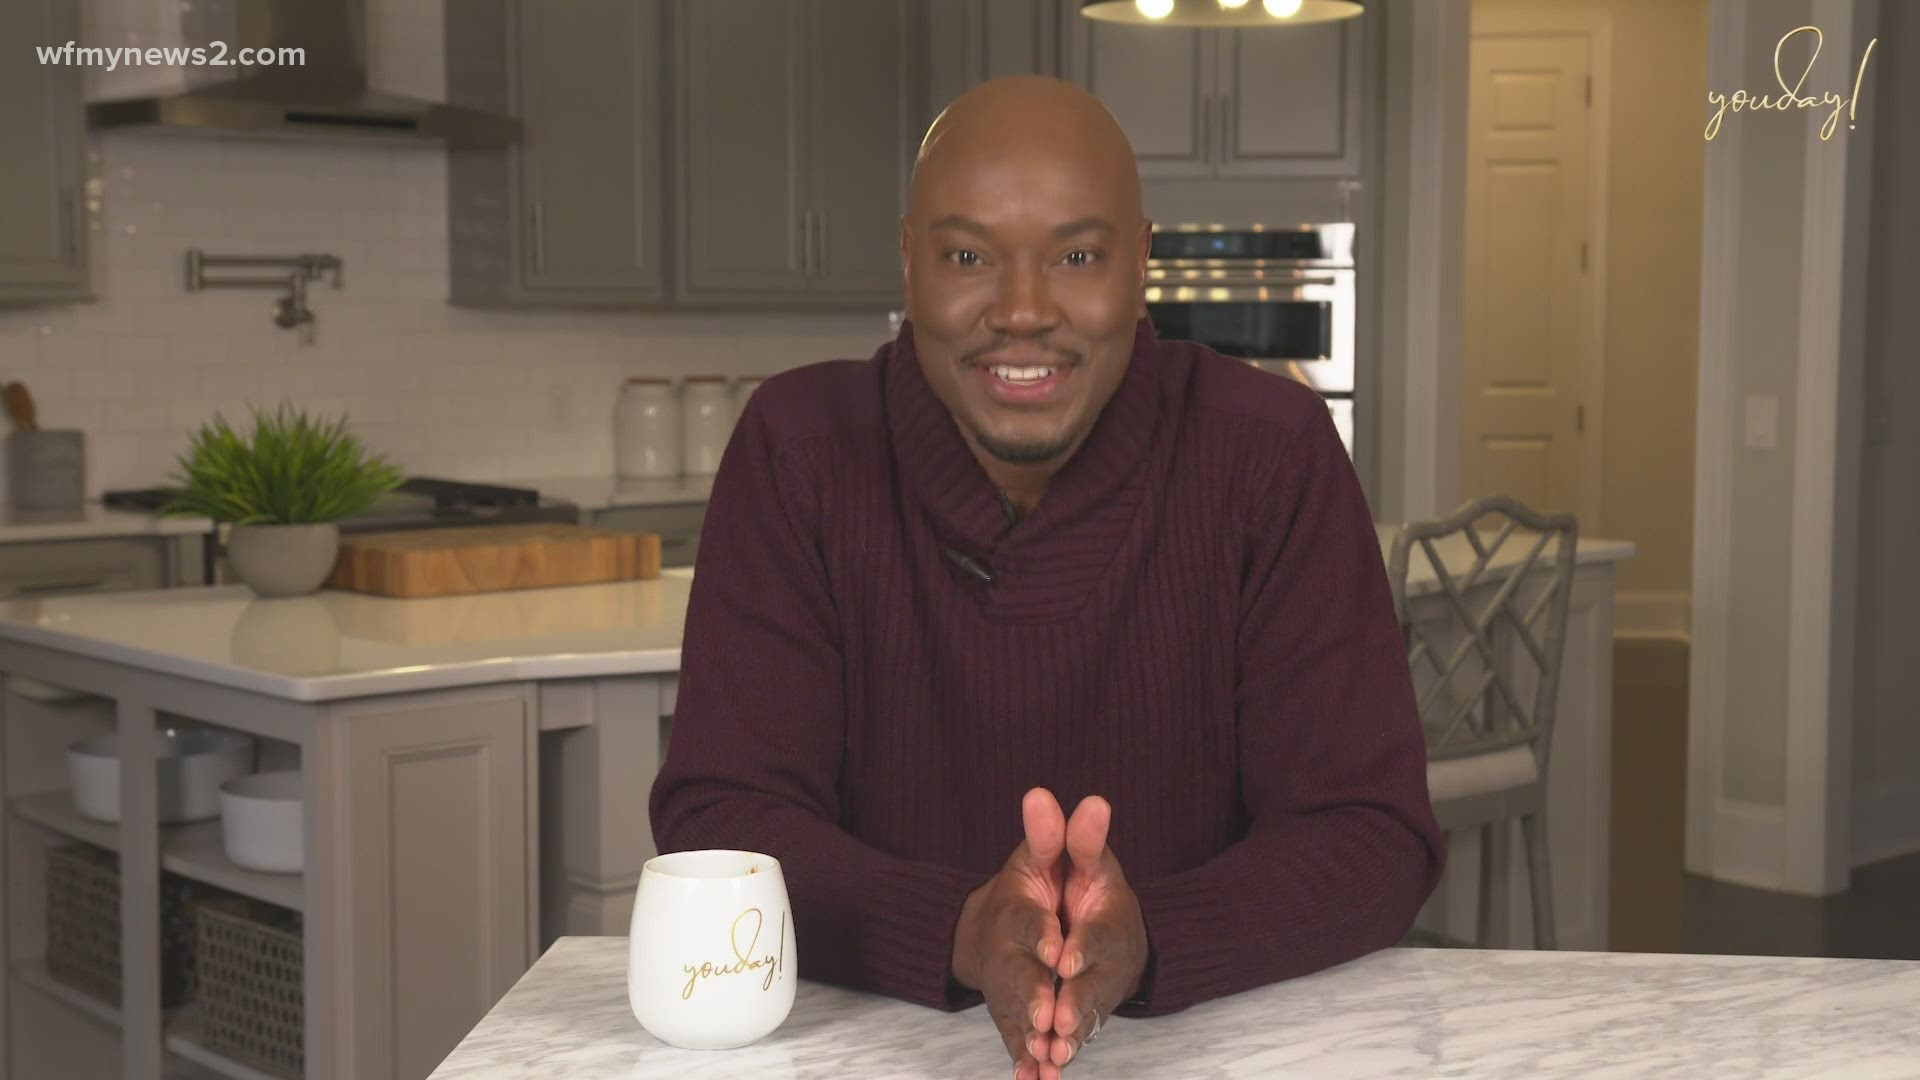 Today Coach Lamonte shares how you can stay positive amid your dark times.